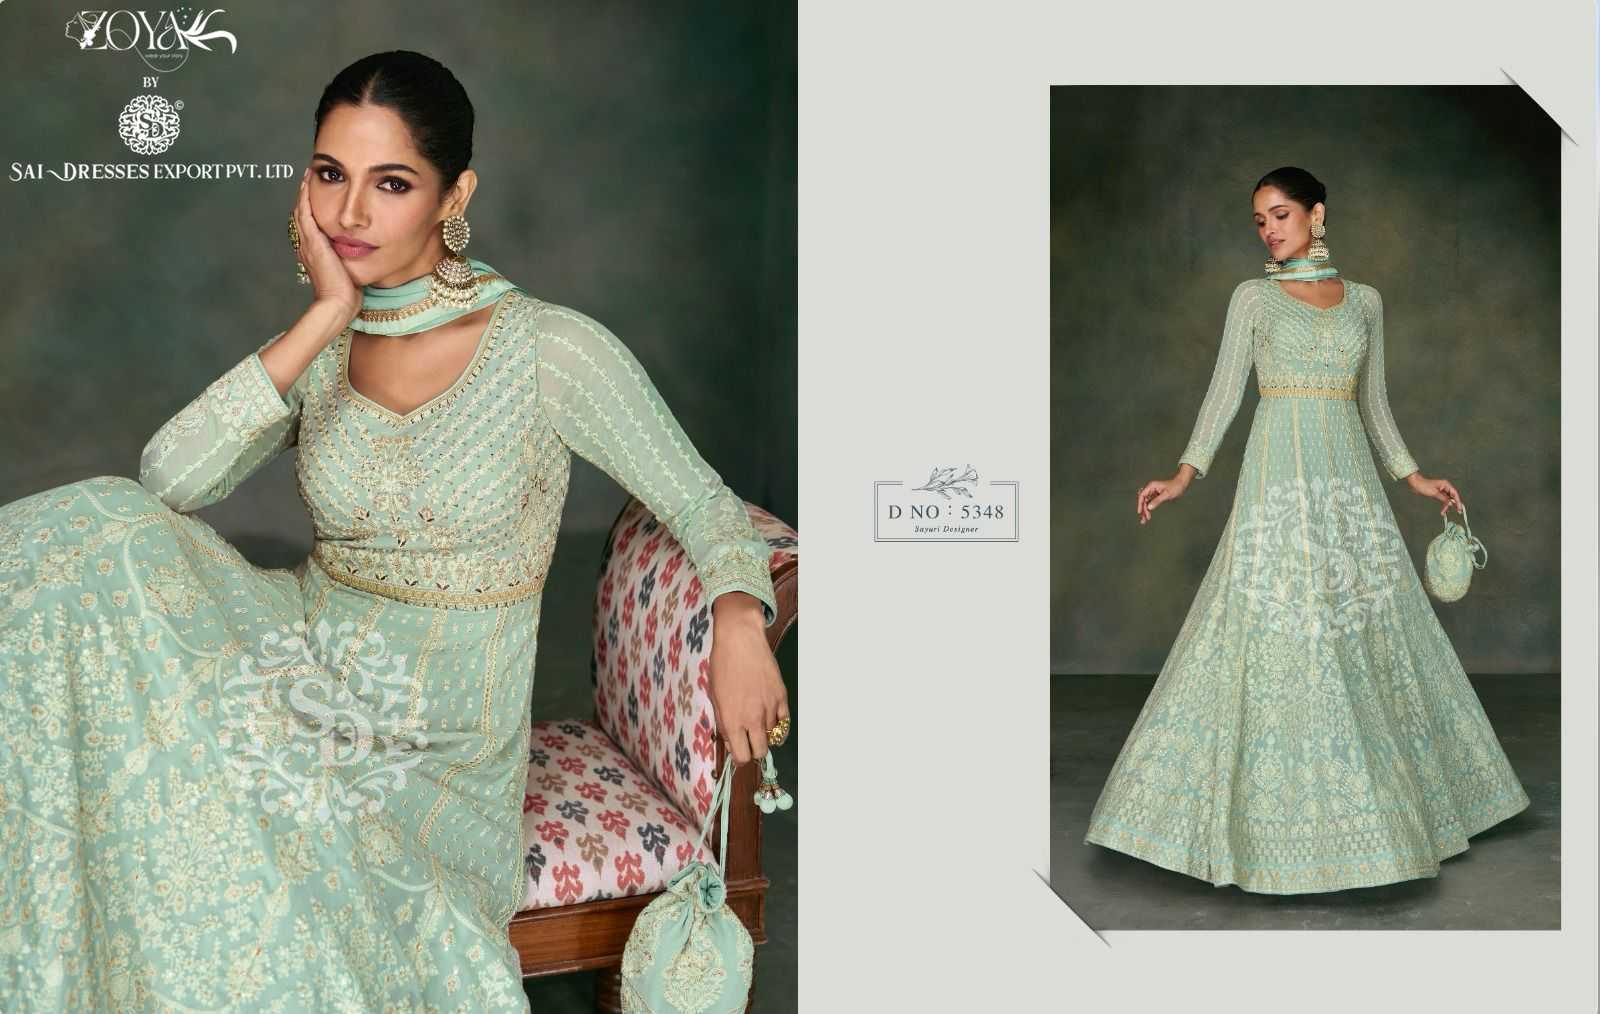 SAI DRESSES PRESENT NAYAAB READYMADE SPECIAL WEDDING WEAR HEAVY DESIGNER LONG GOWN WITH DUPATTA IN WHOLESALE RATE IN SURAT